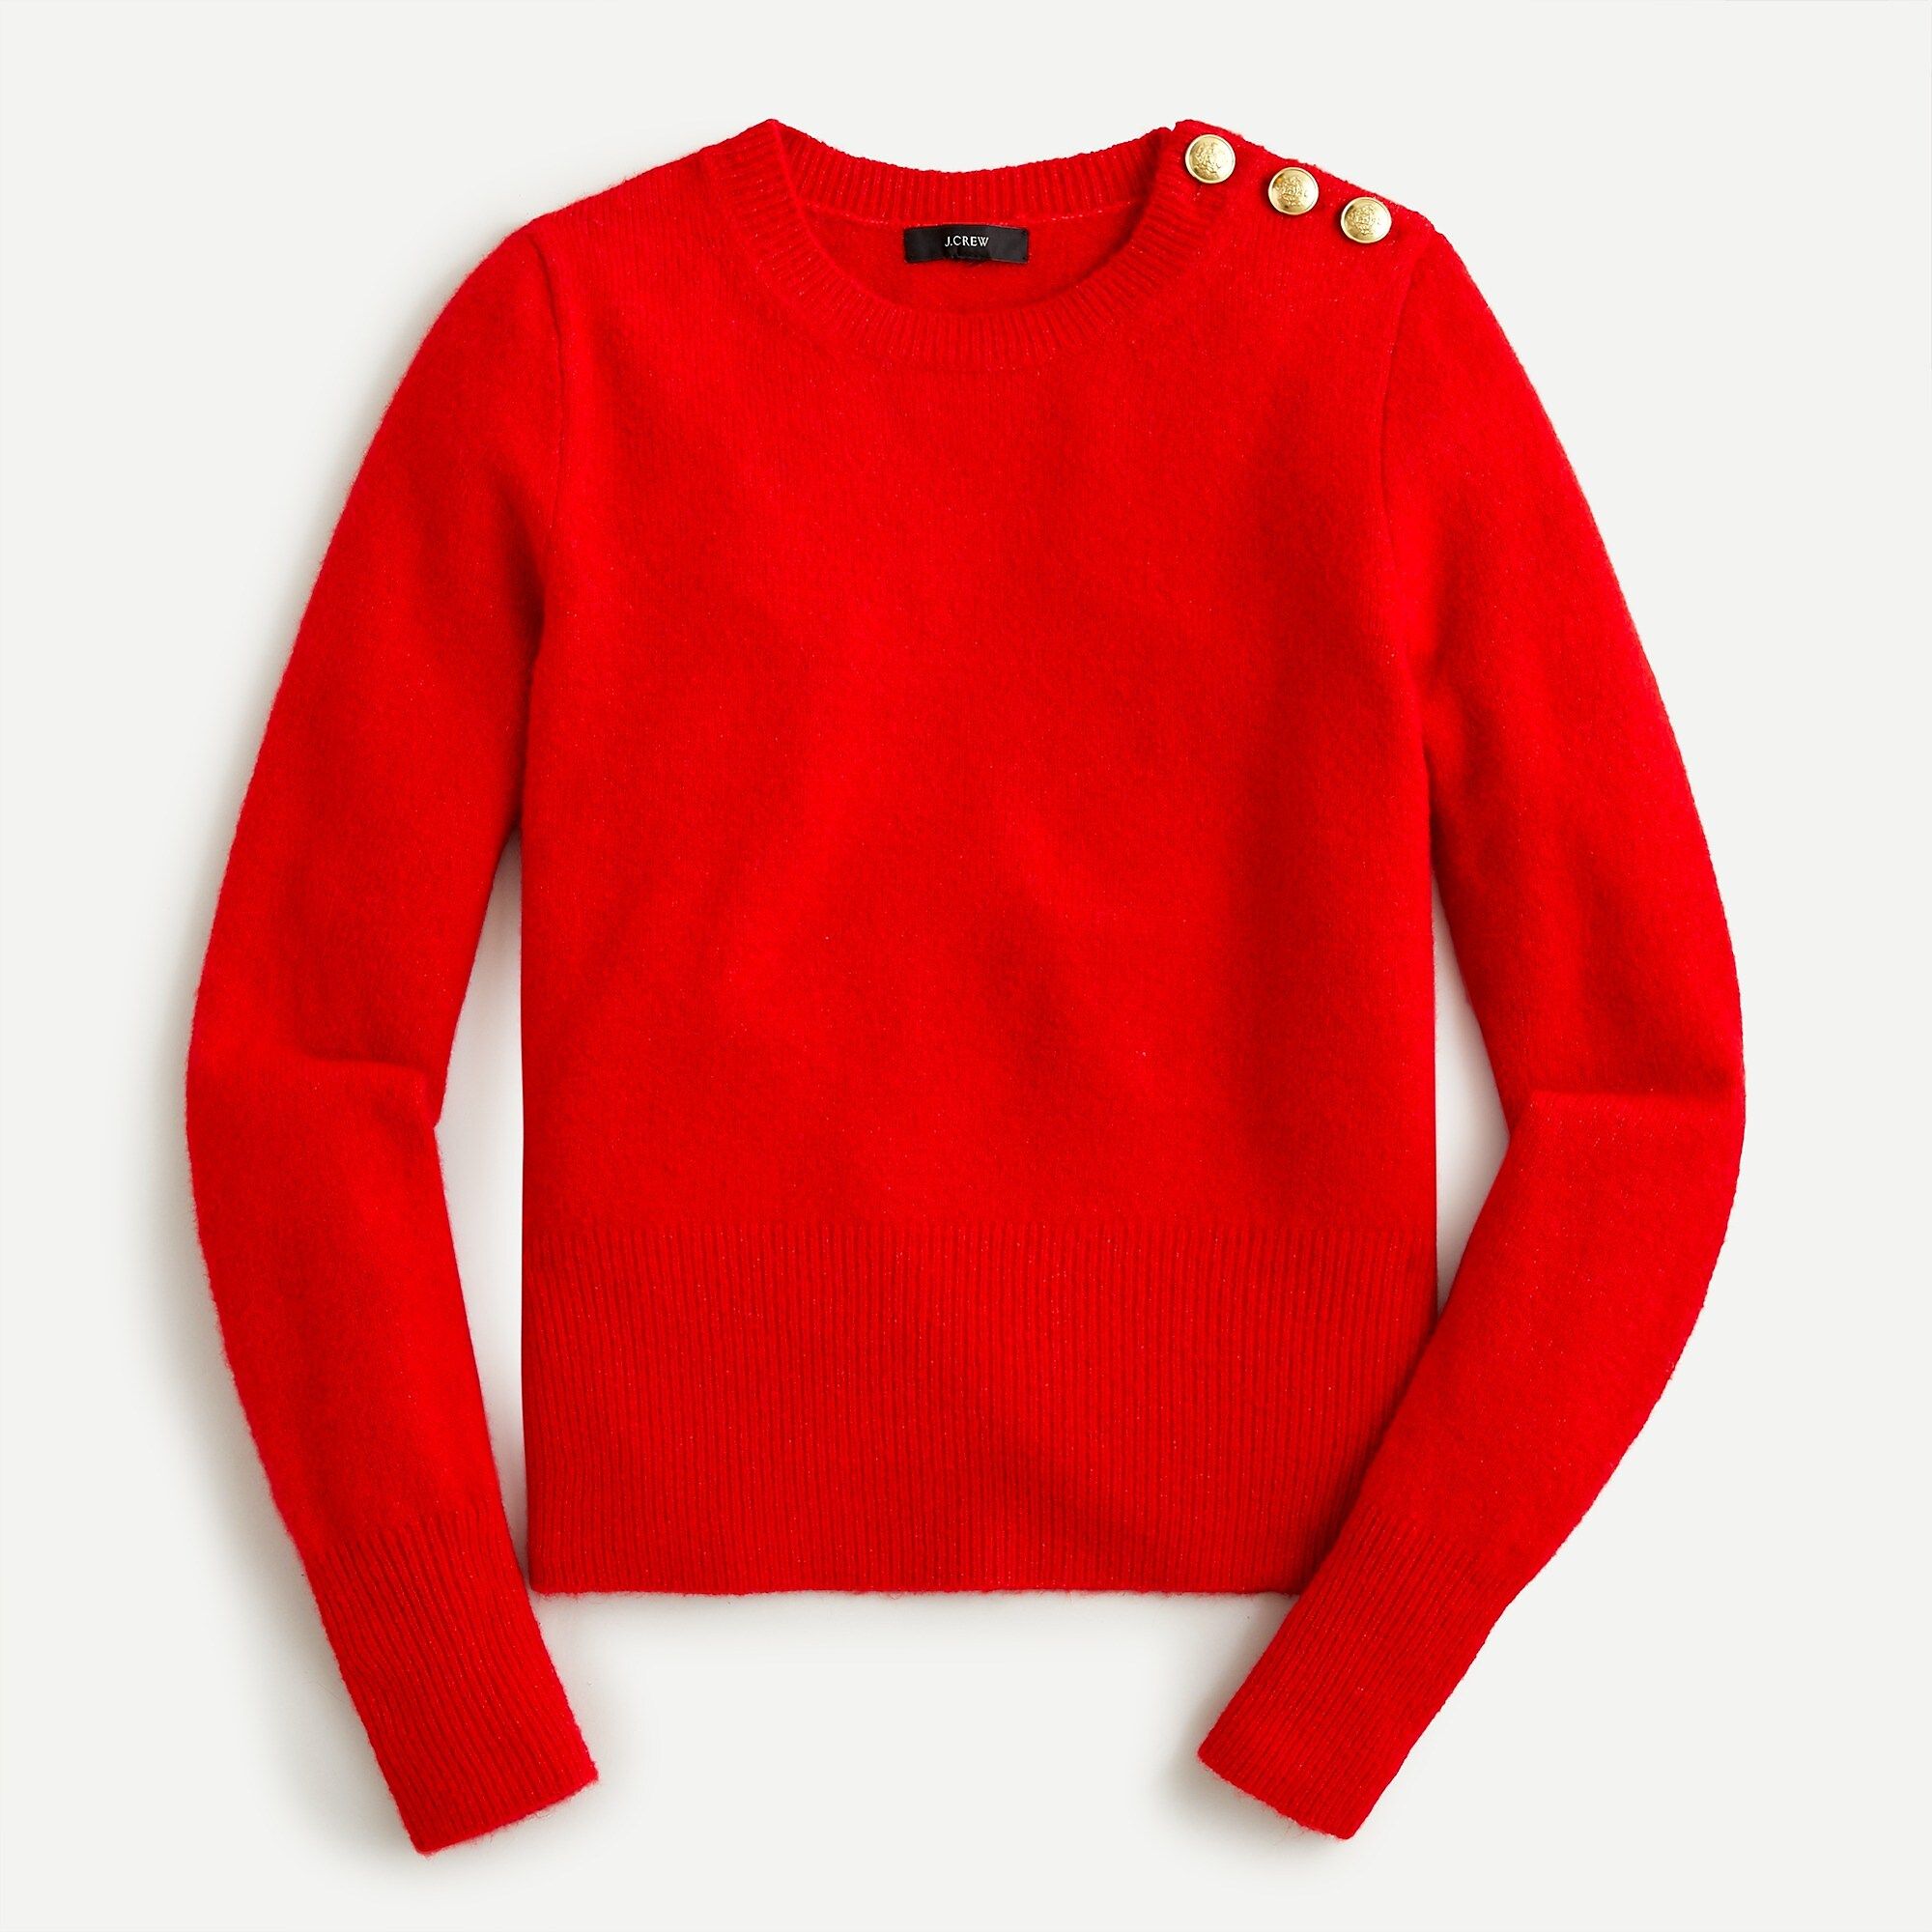 Crewneck sweater with shoulder buttons | J.Crew US